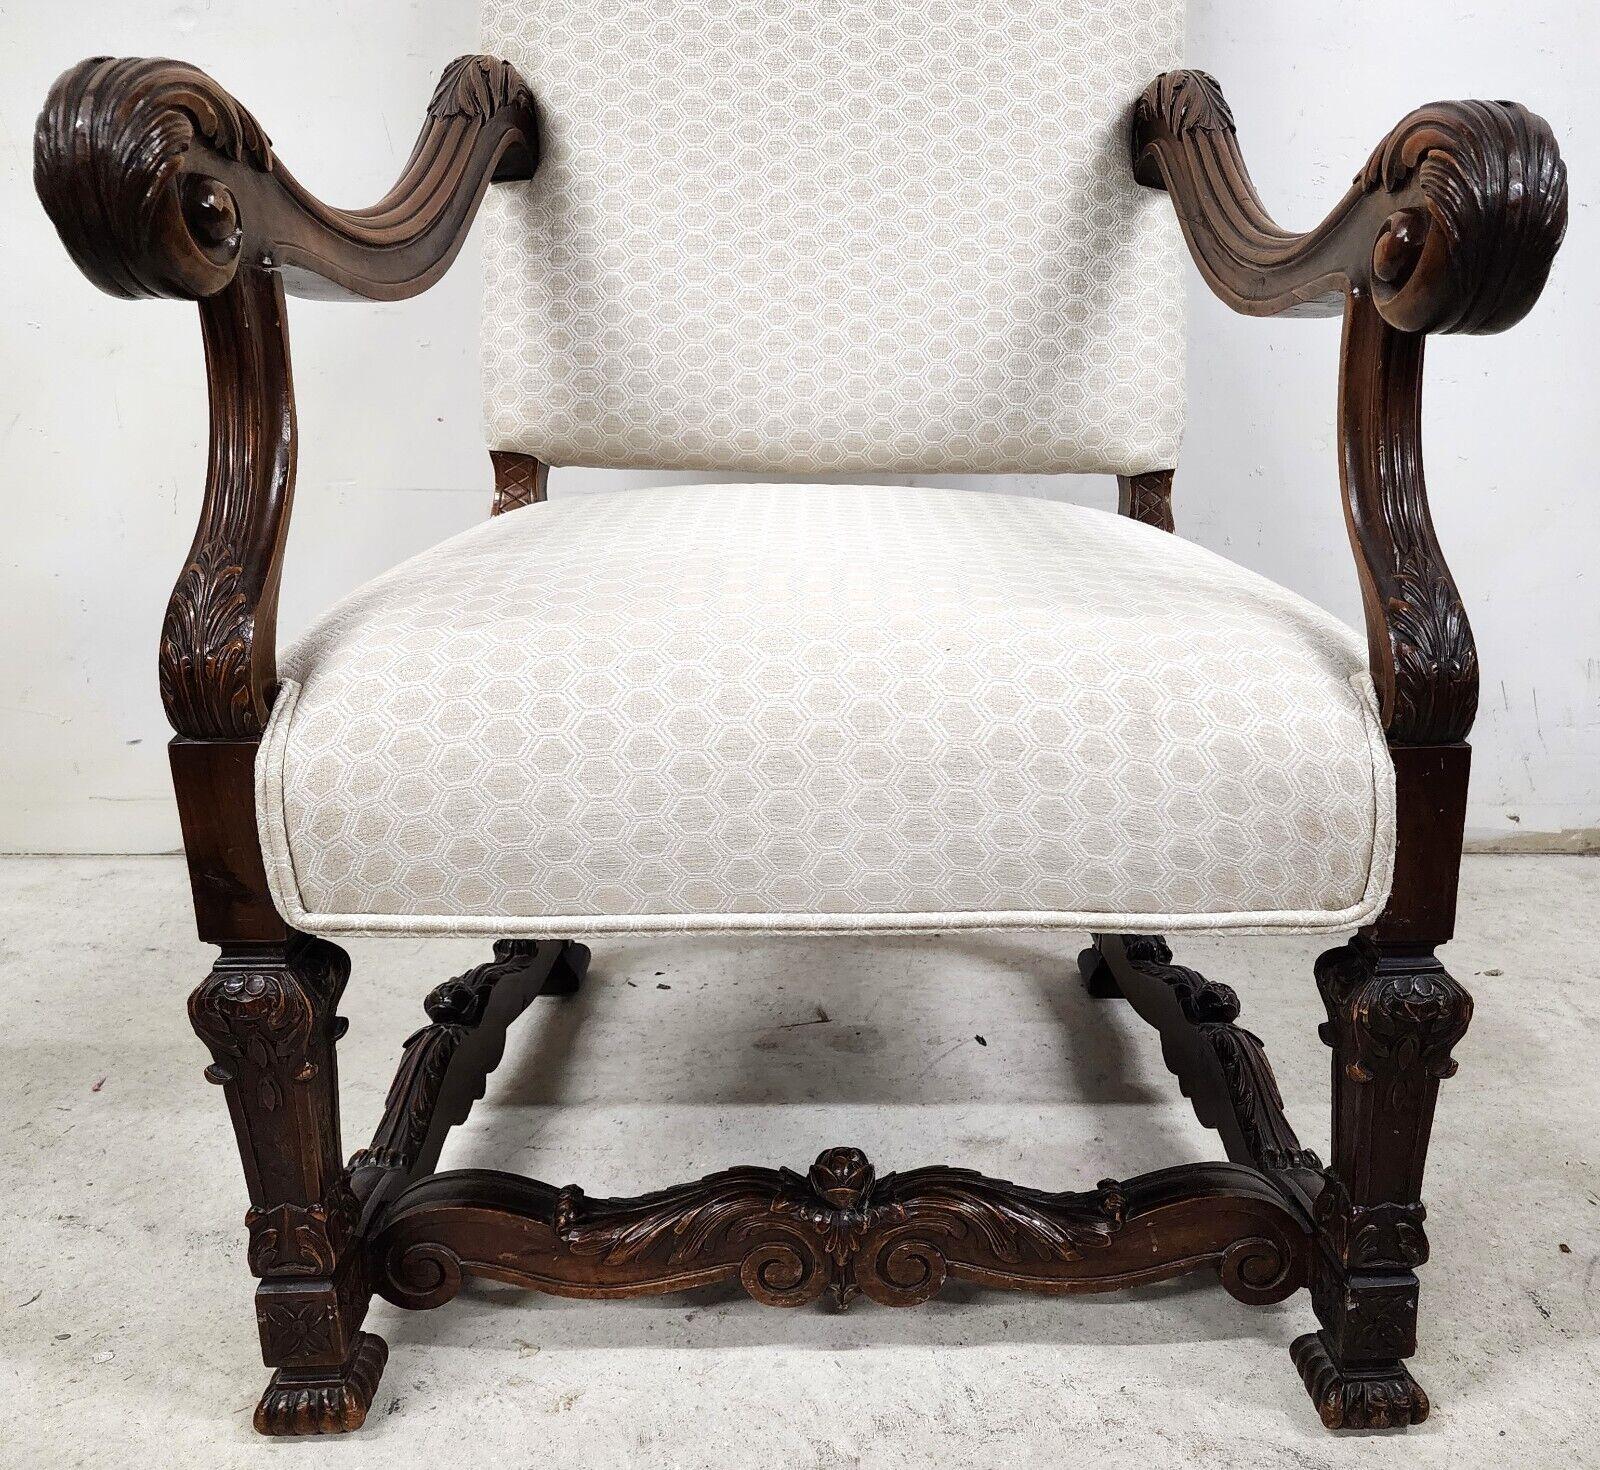 For FULL item description click on CONTINUE READING at the bottom of this page.

Offering one of our recent Palm beach estate fine furniture acquisitions of a
antique Louis XIV style French armchair hand carved

Coloration: Cotton fabric is a